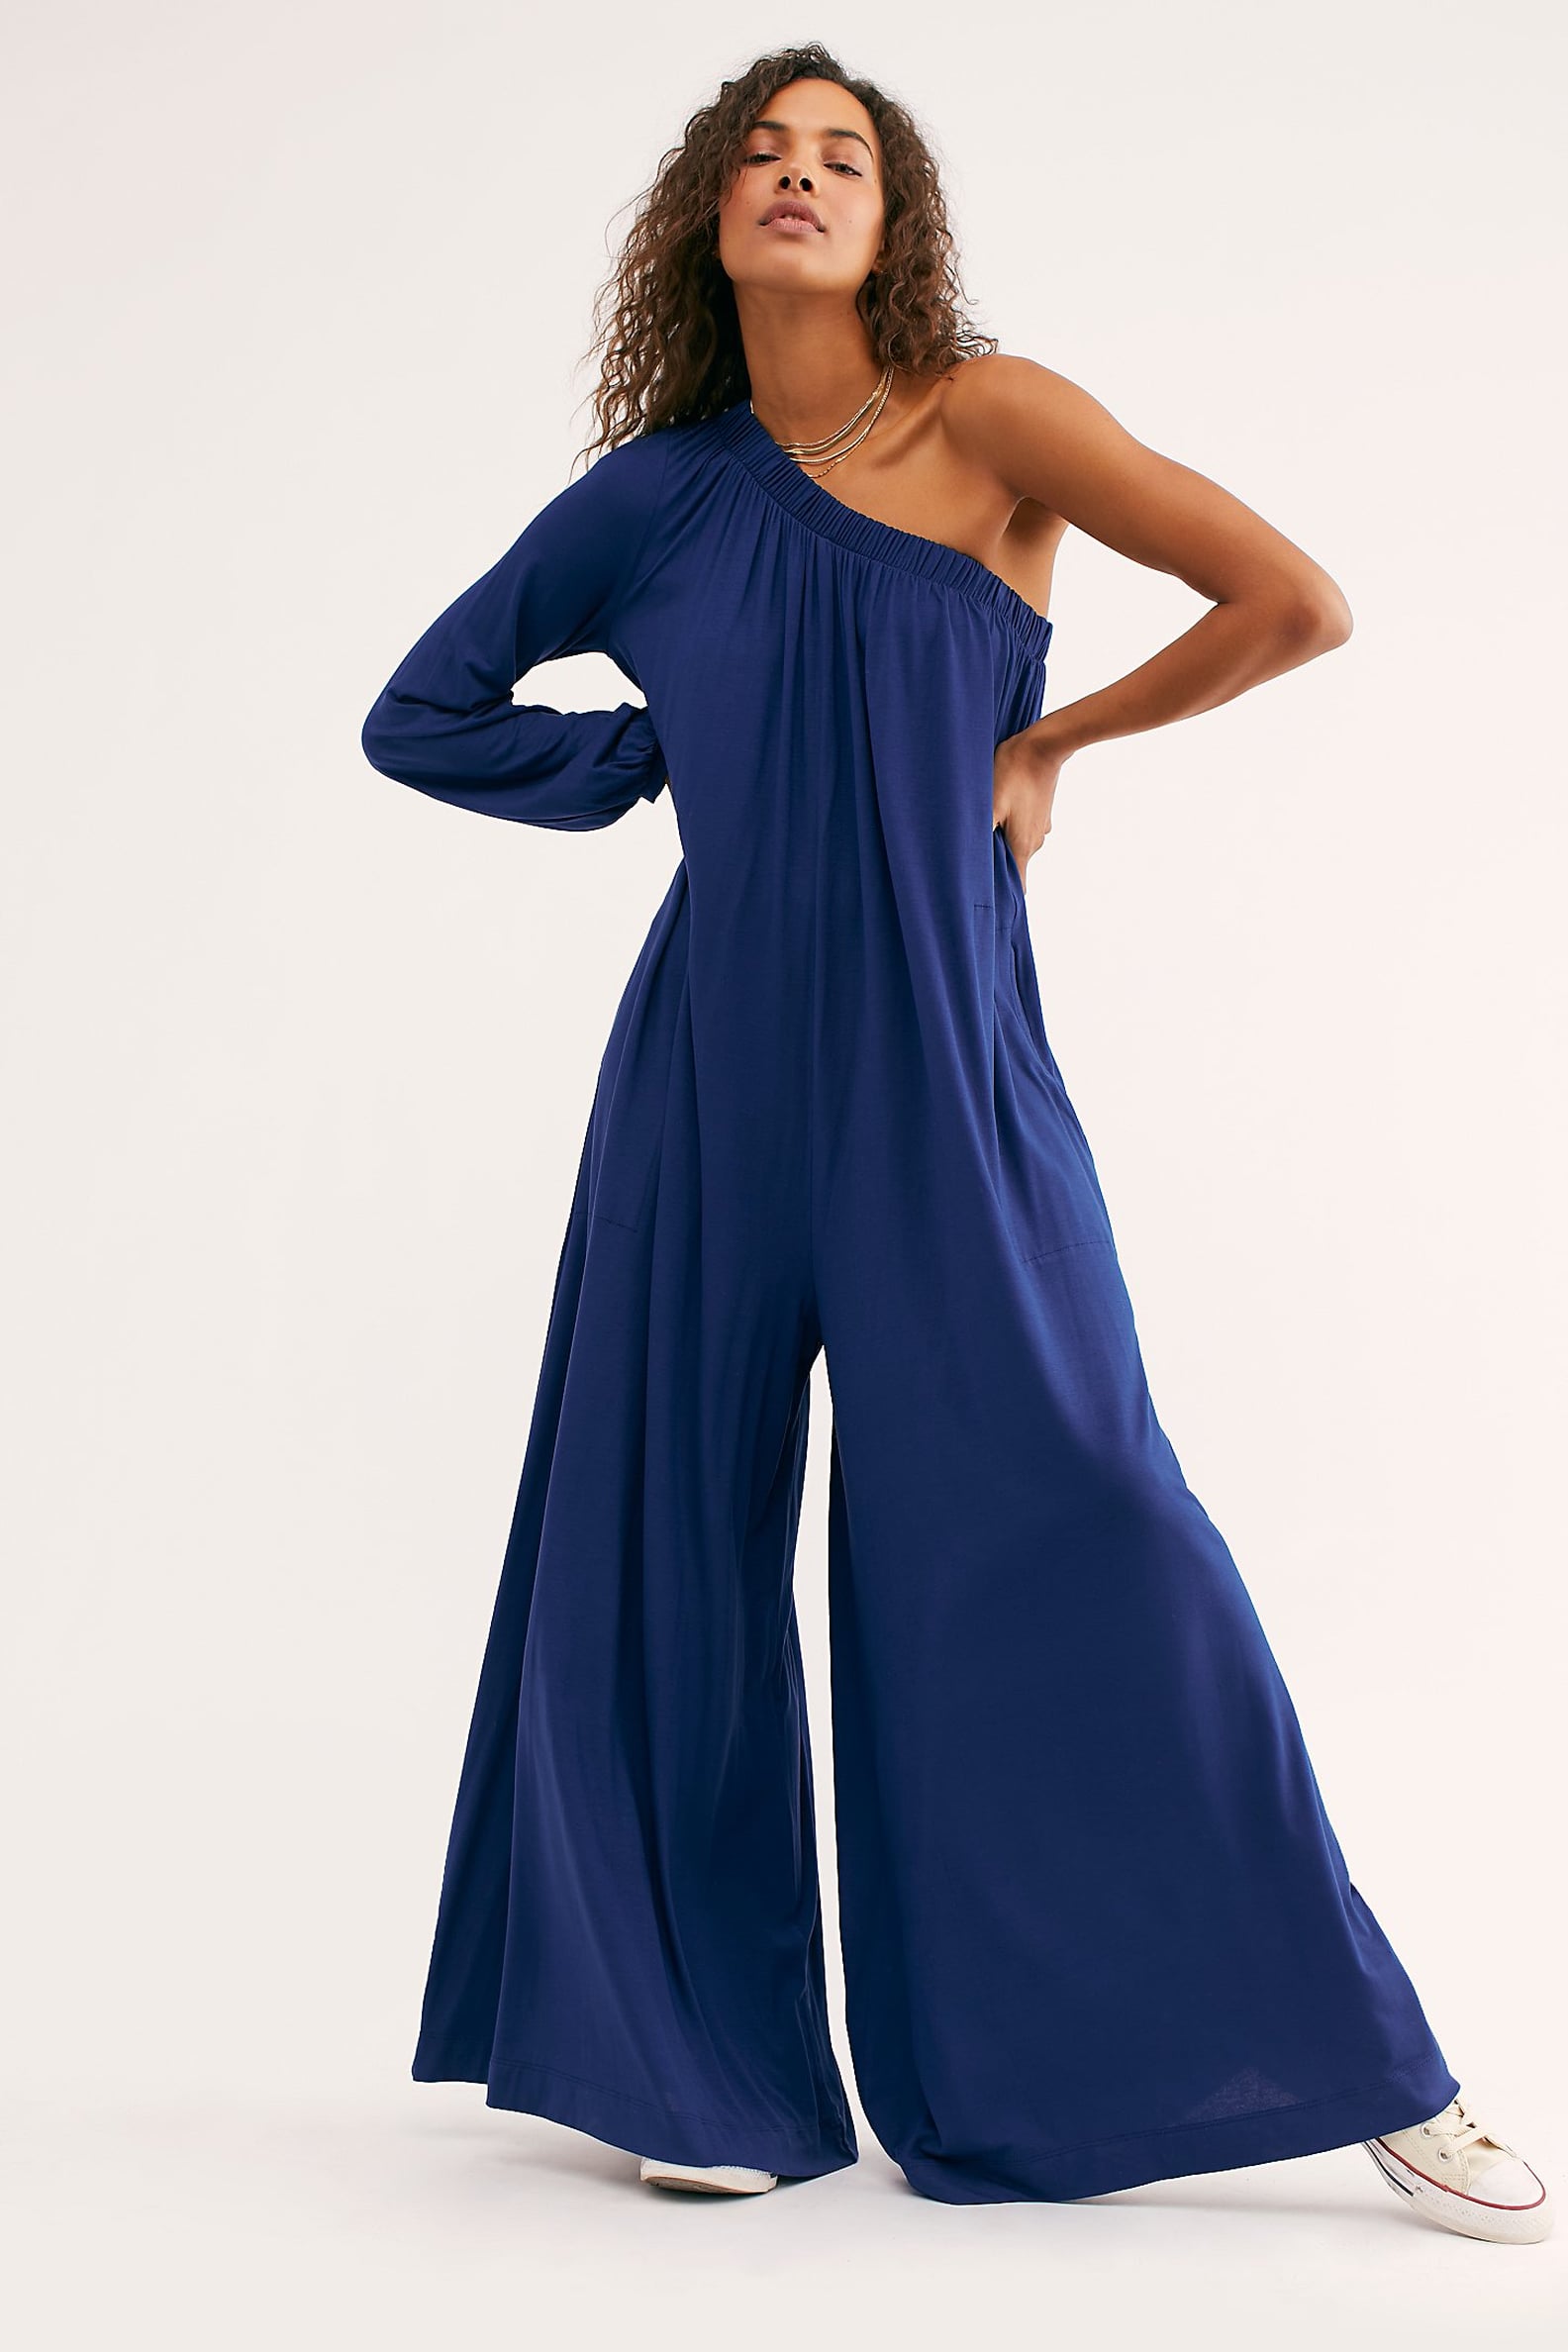 Best Jumpsuits From Free People | POPSUGAR Fashion